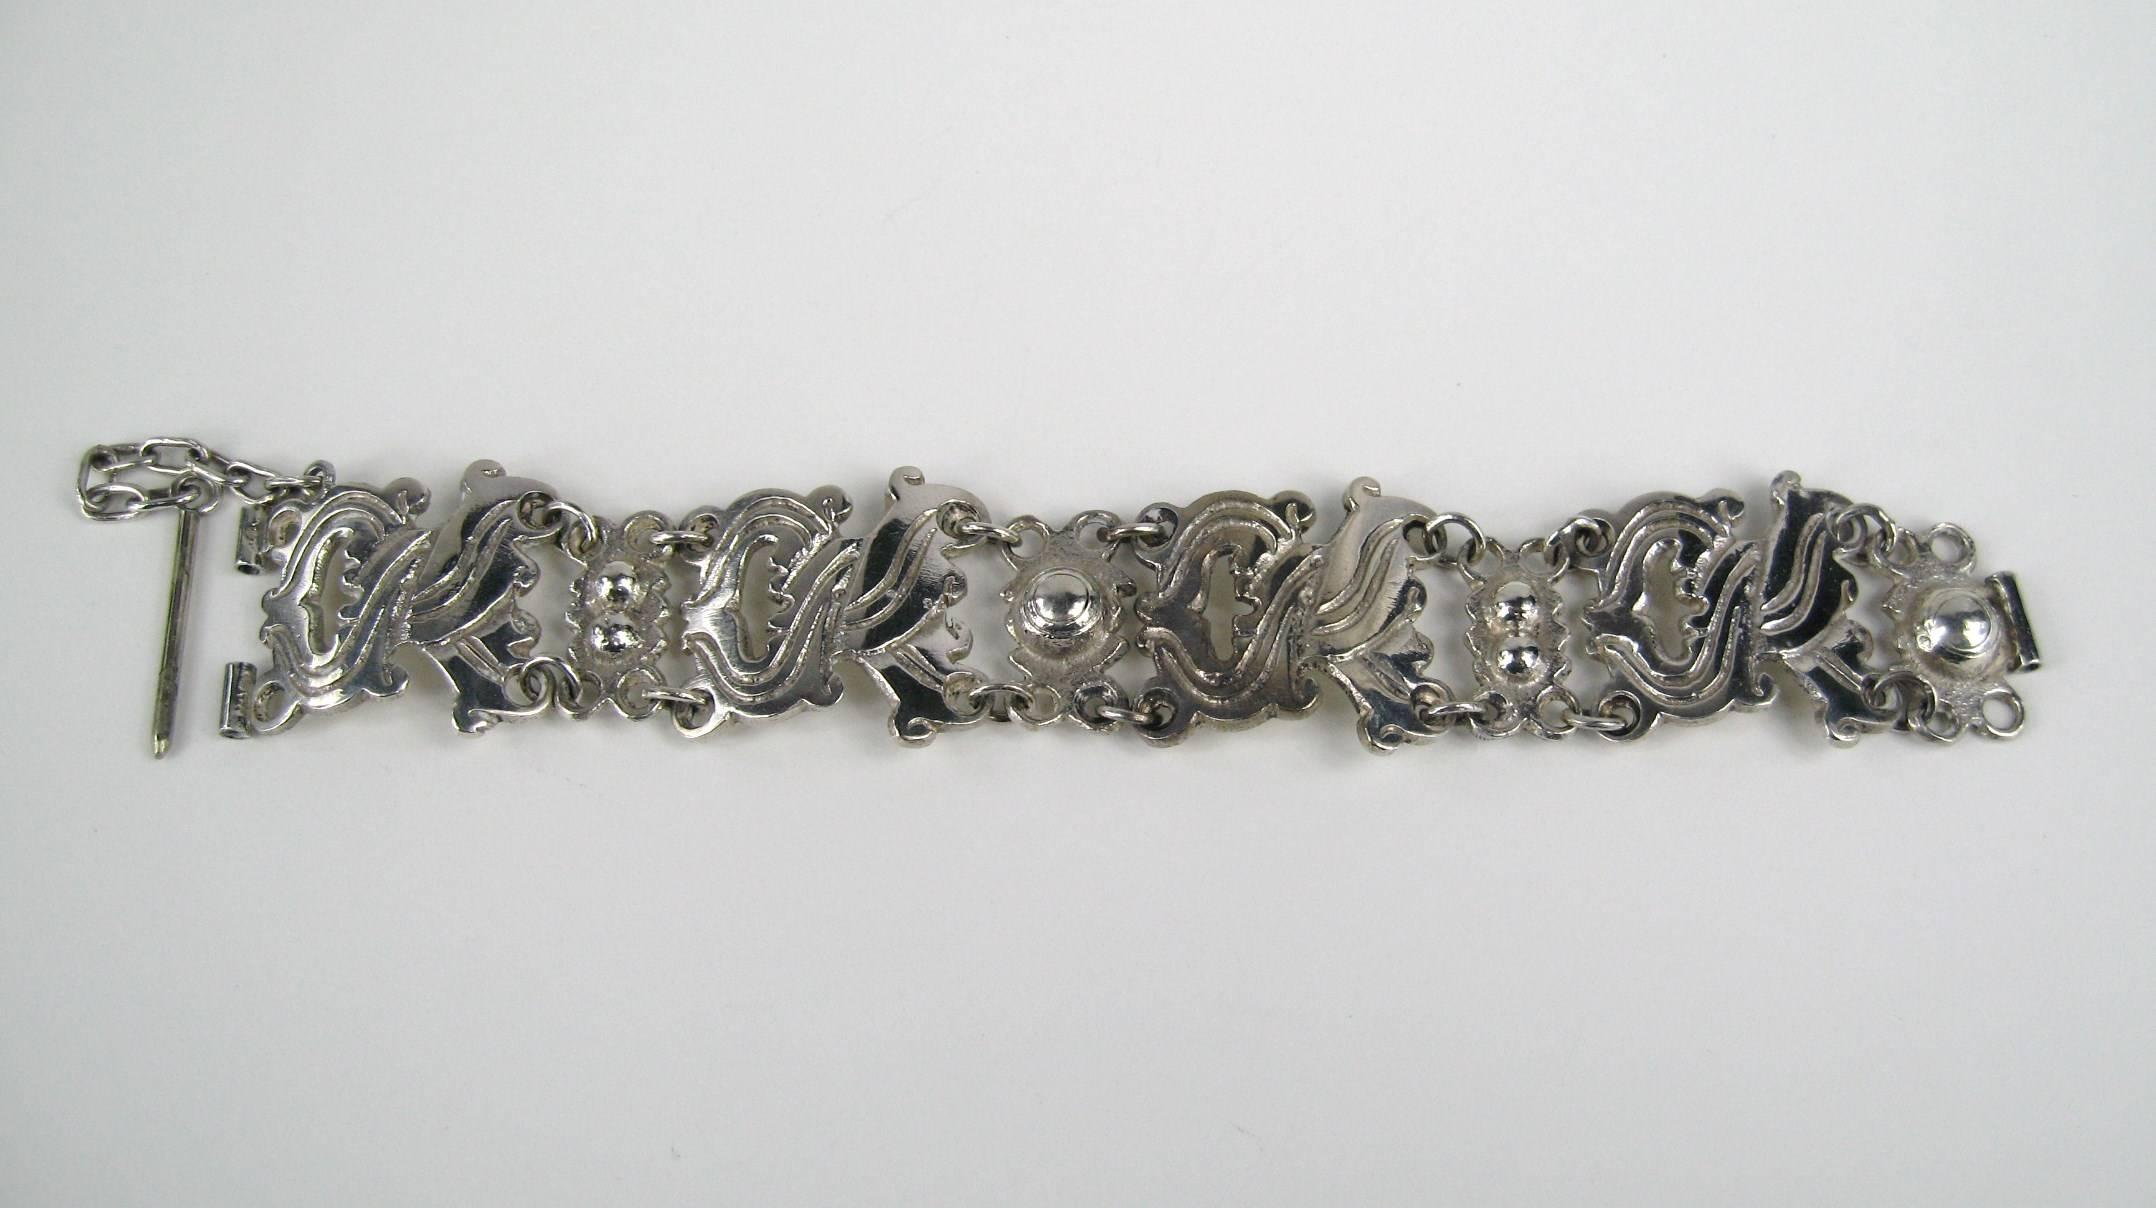 Stunning Paneled Mexican Silver Bracelet Hallmarked Mexico 900. measures 1.18 in.  wide 7.5 inches end to end. Plenty more vintage sterling listed on our storefront. ** This is out of our massive collection of Hopi, Zuni, Navajo, Southwestern,